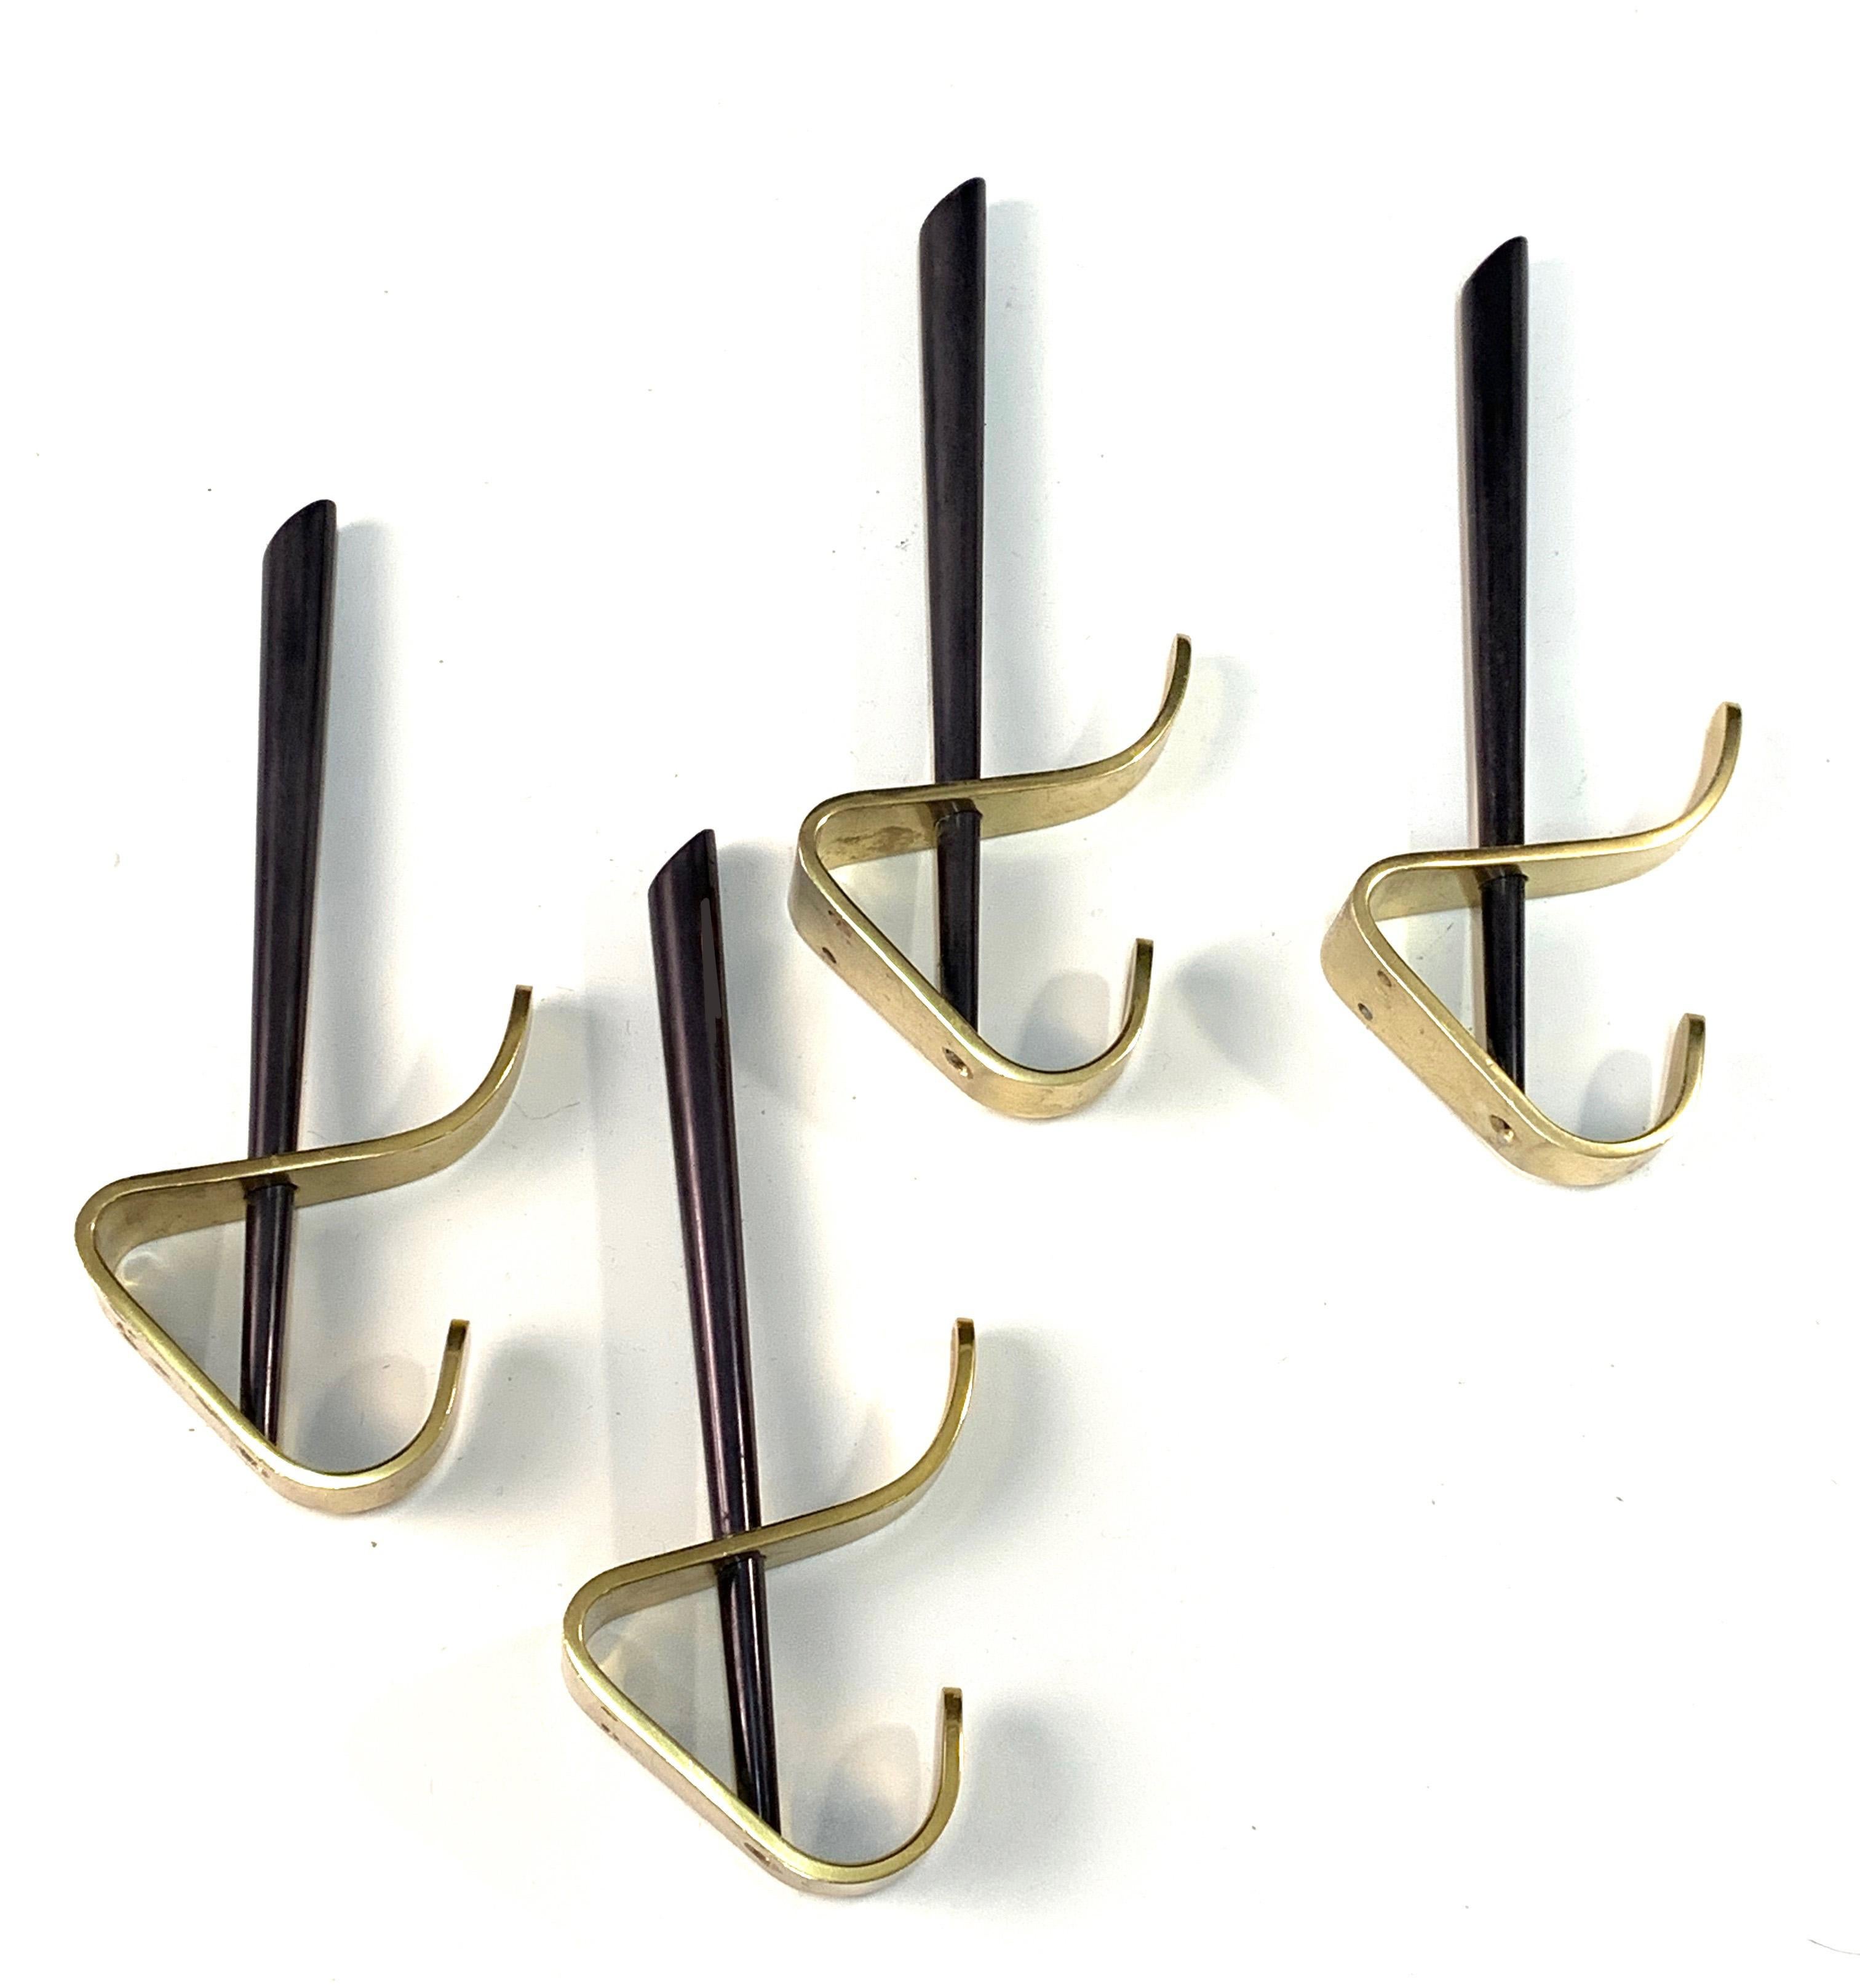 20th Century Mid-Century Modern Brass and Lacquered Aluminum Italian Coat Hooks, 1970s For Sale